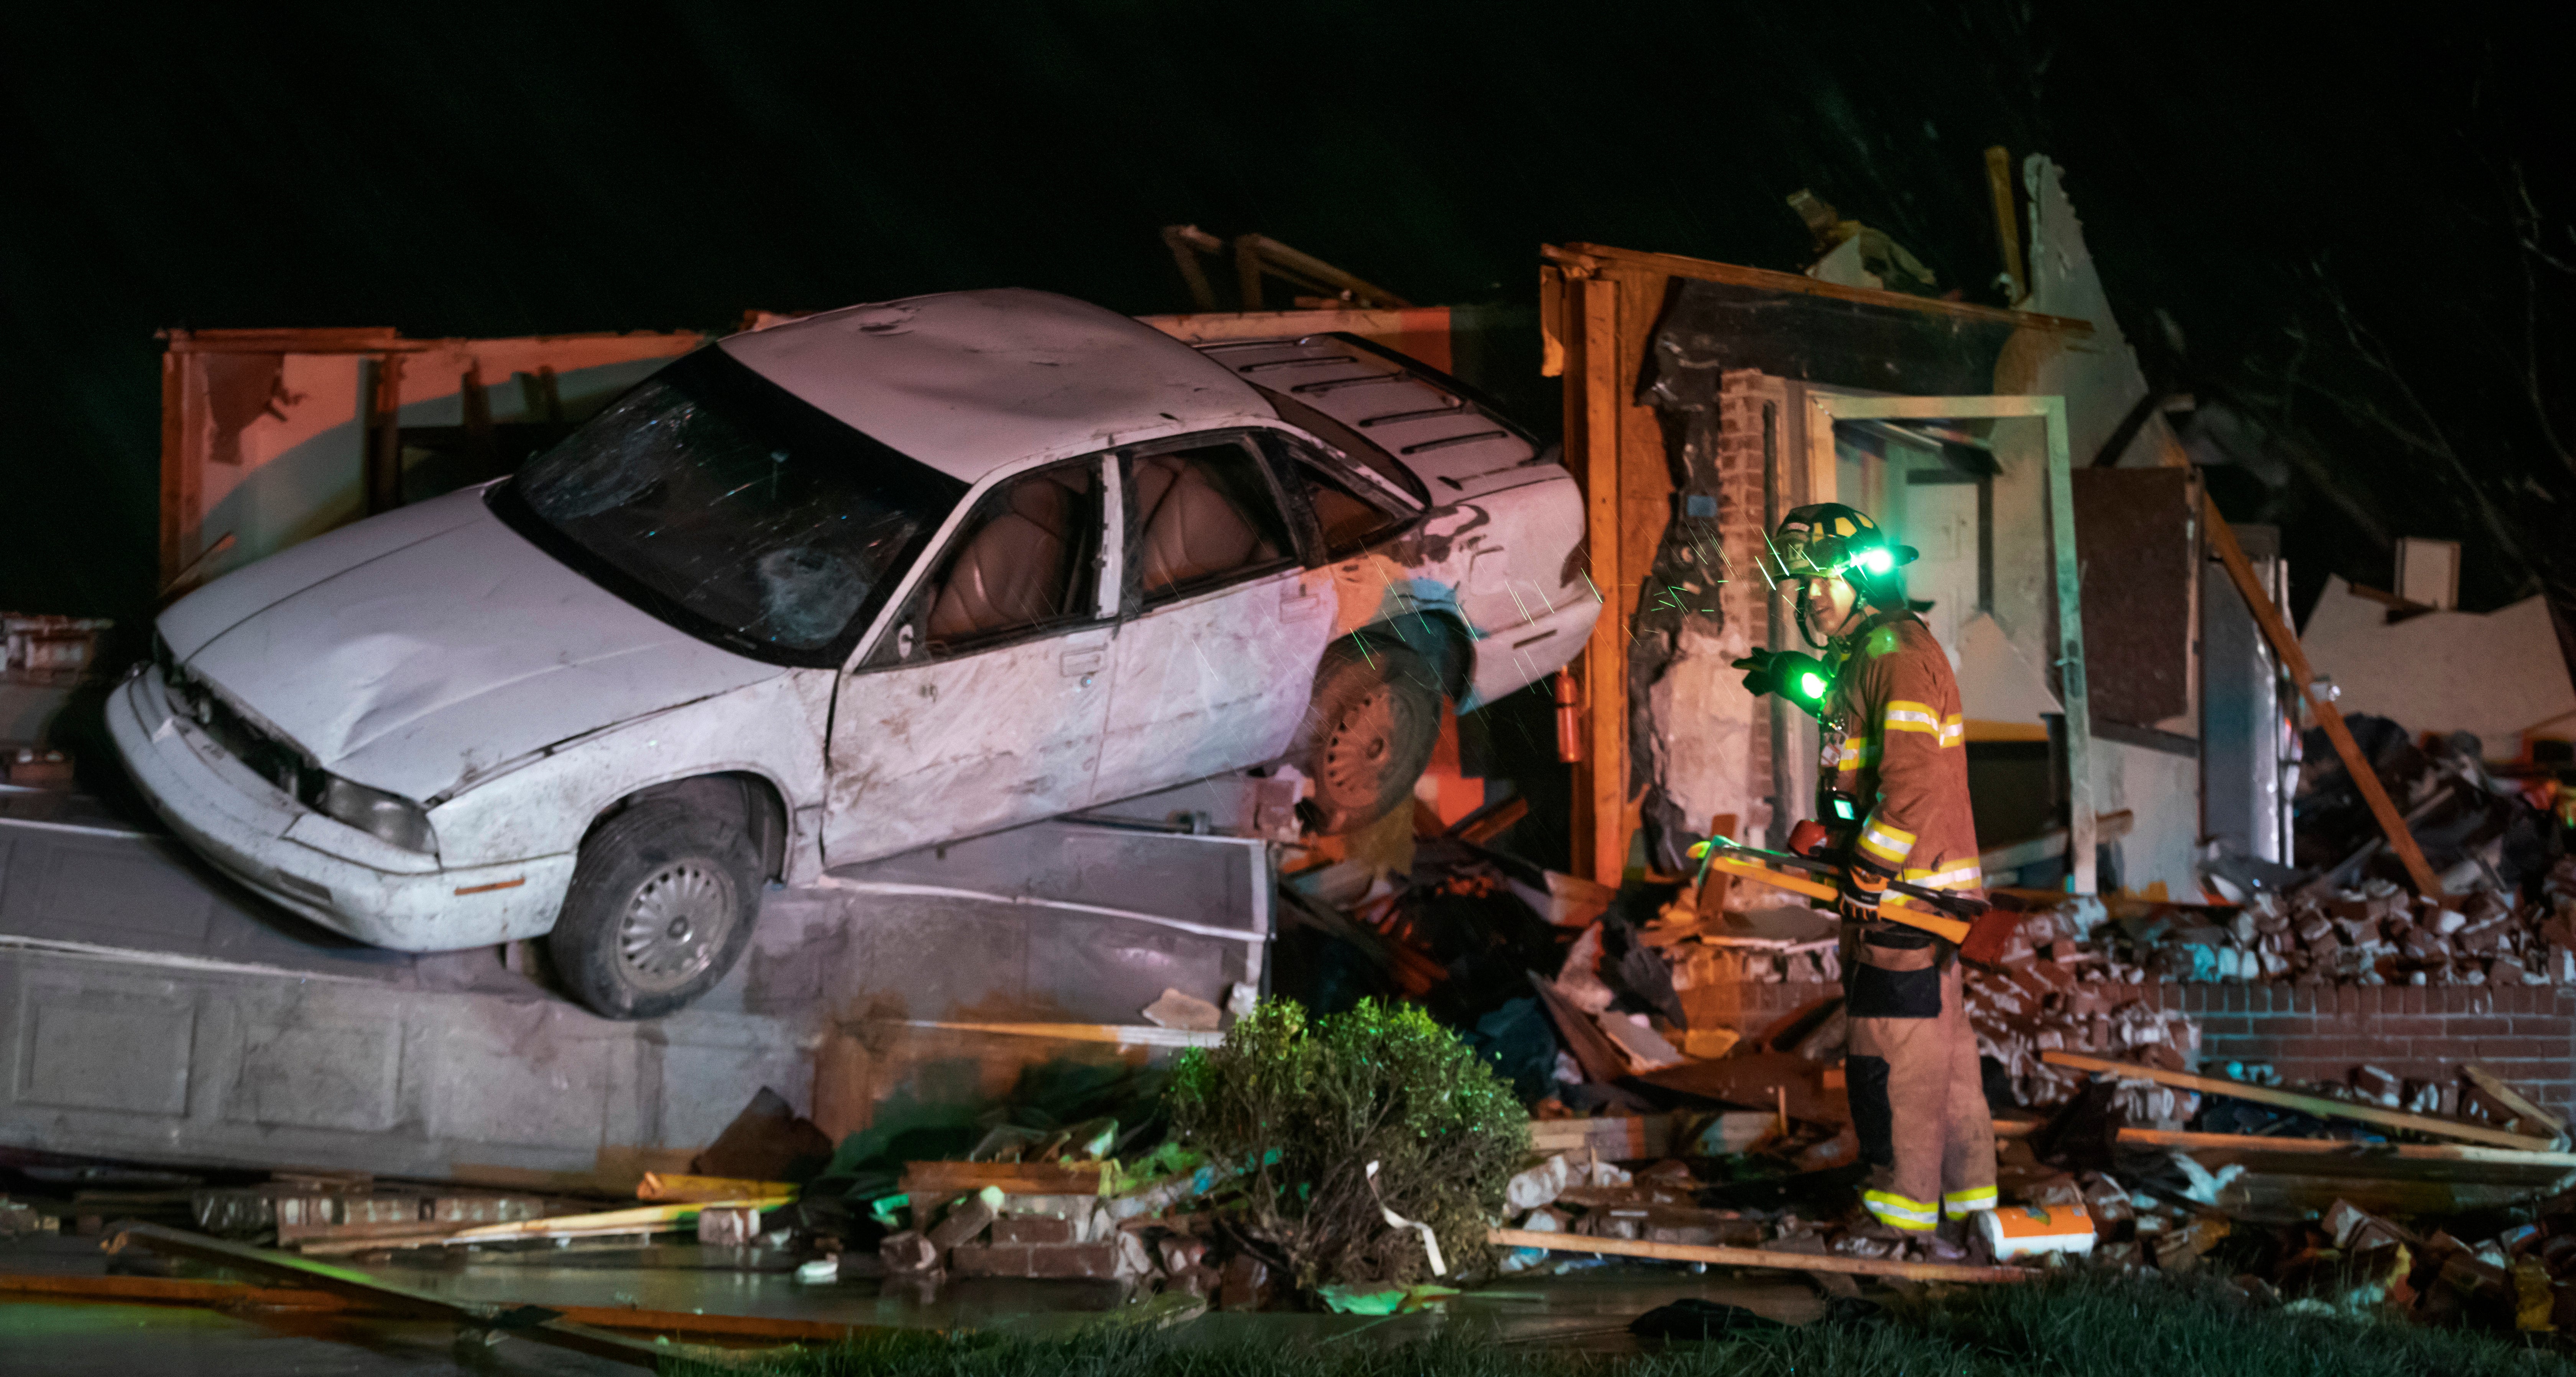 Firefighters survey the aftermath of the tornado in Kansas on Friday night